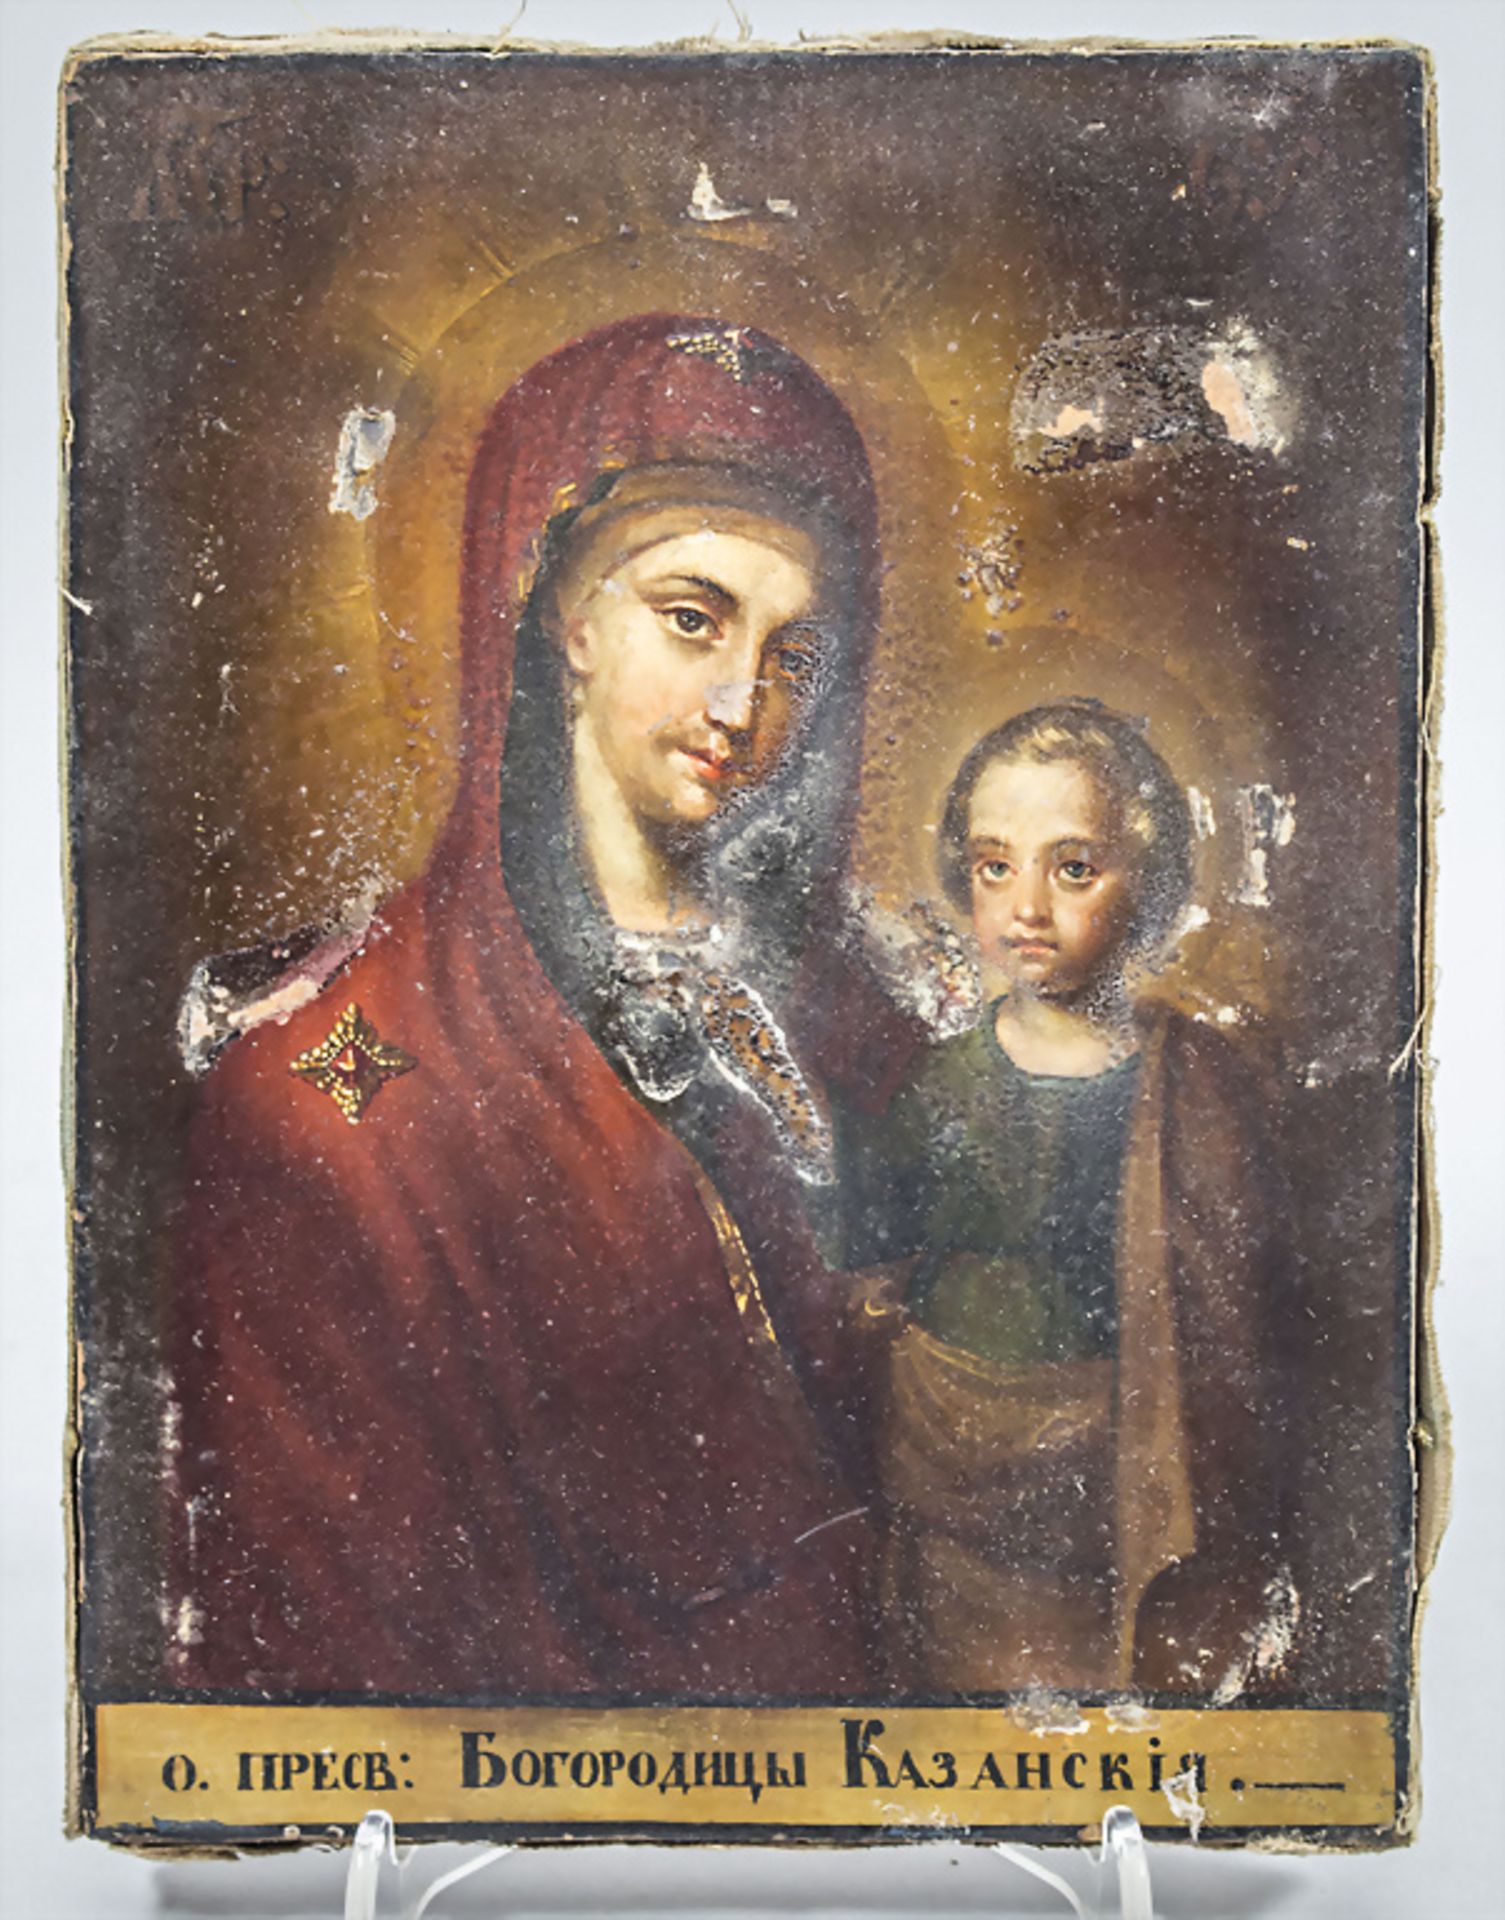 Madonnen Ikone 'Gottesmutter von Kasan' / Icon 'Mother Mary of Kasan', wohl 19. Jh. - Image 3 of 5